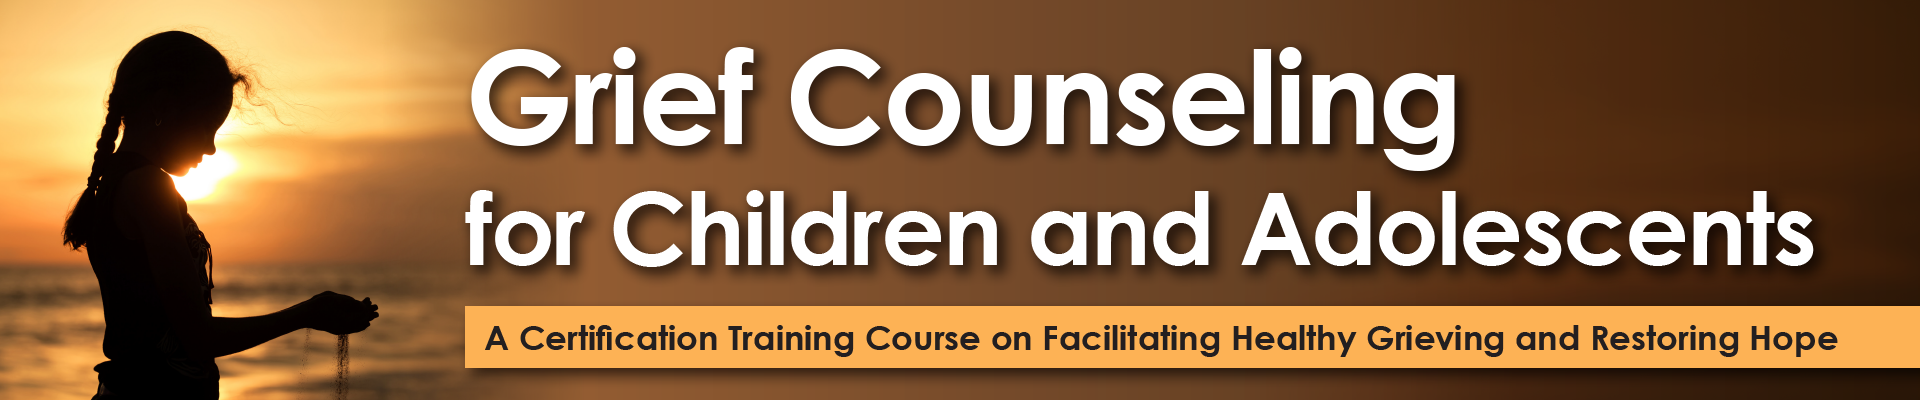 Grief Counseling for Children and Adolescents: A Certification Training Course on Facilitating Healthy Grieving and Restoring Hope